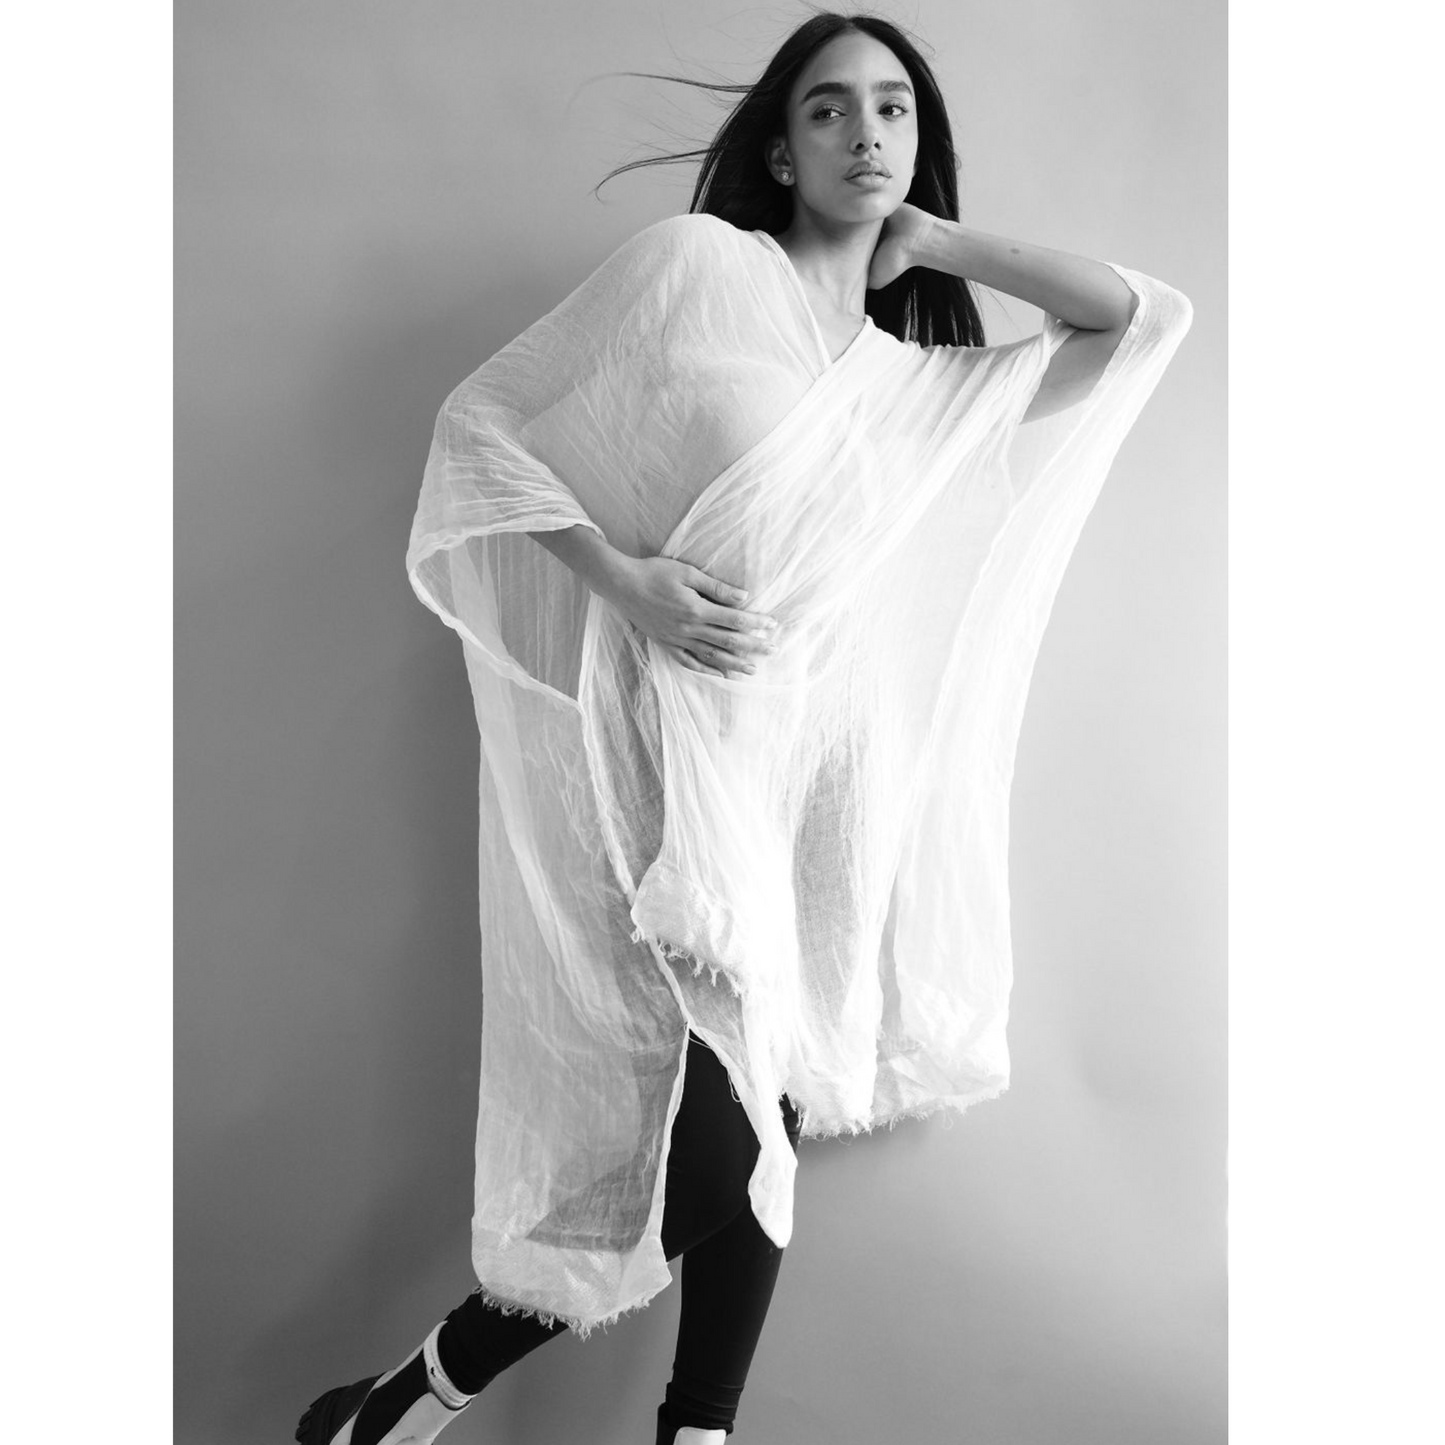 Discover Adey Abeba's Pure White Kaftan – chic, comfy, and empowering. With side slits and a gold belt, it adapts to your style effortlessly. Crafted from organic cotton for comfort and sustainability. Elevate your look with this conscious fashion choice